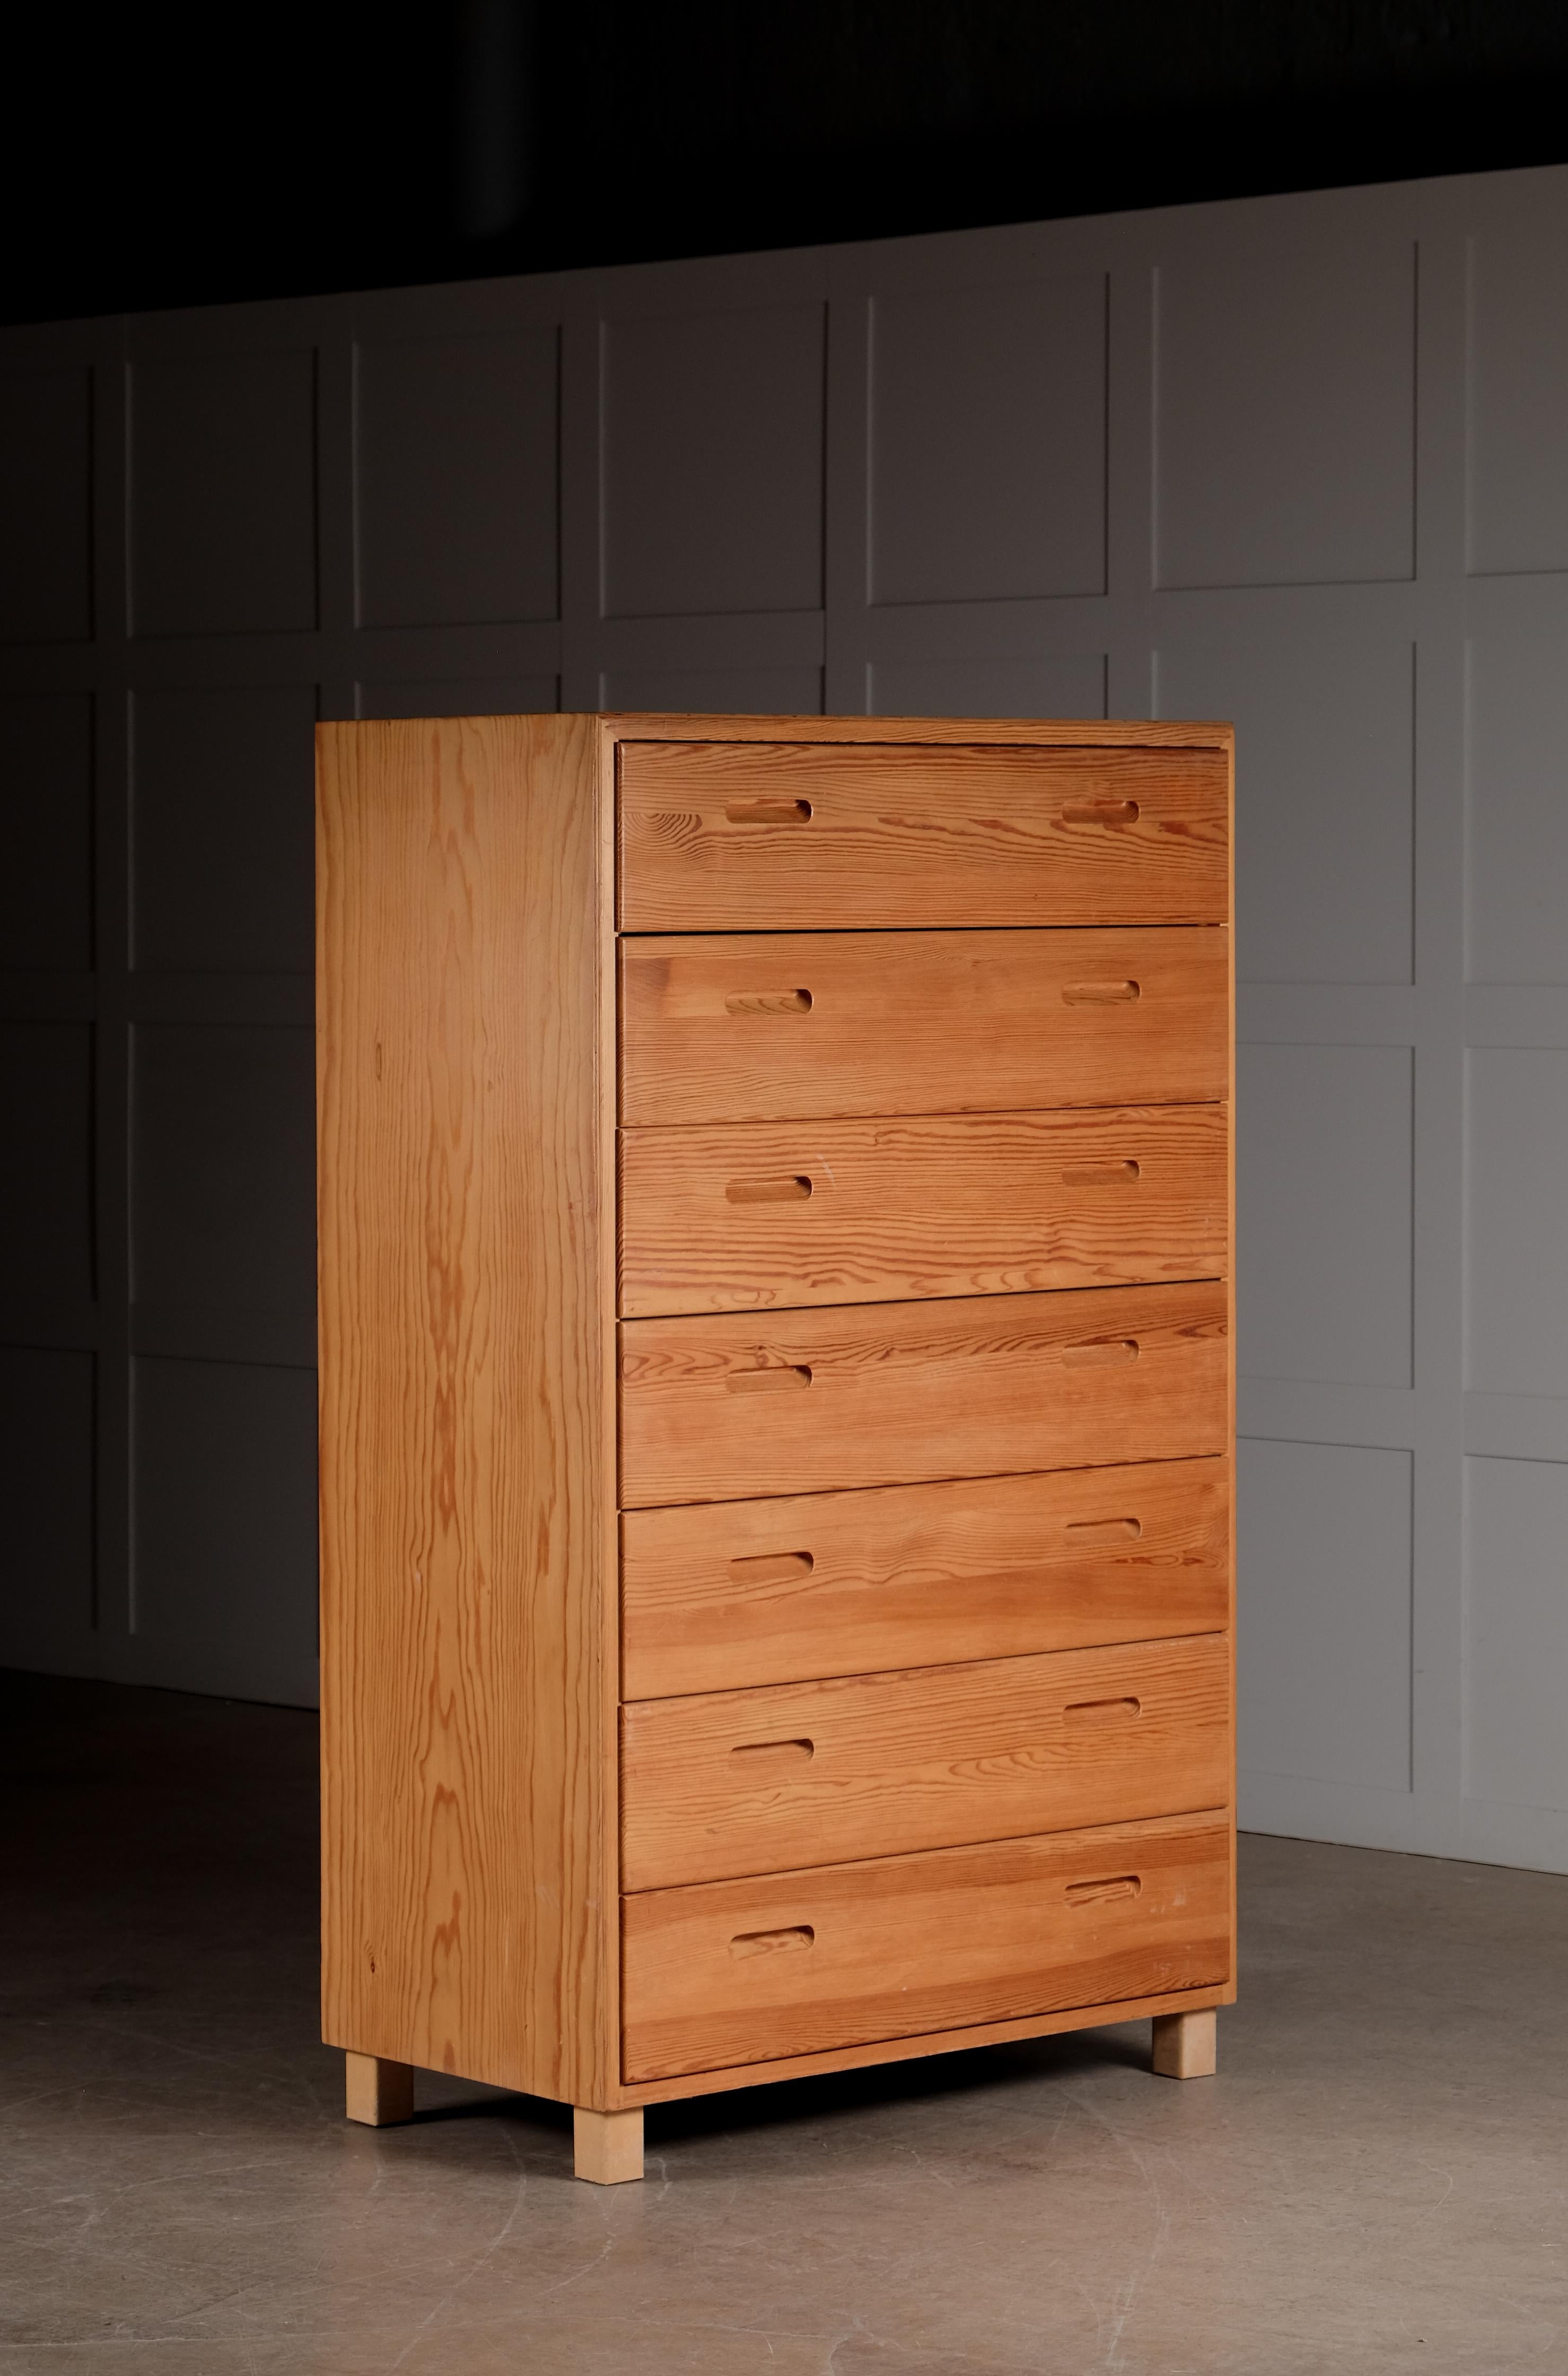 Bureau / chest of drawers in pine. Produced in Sweden, 1960s.
Global front door shipping available.